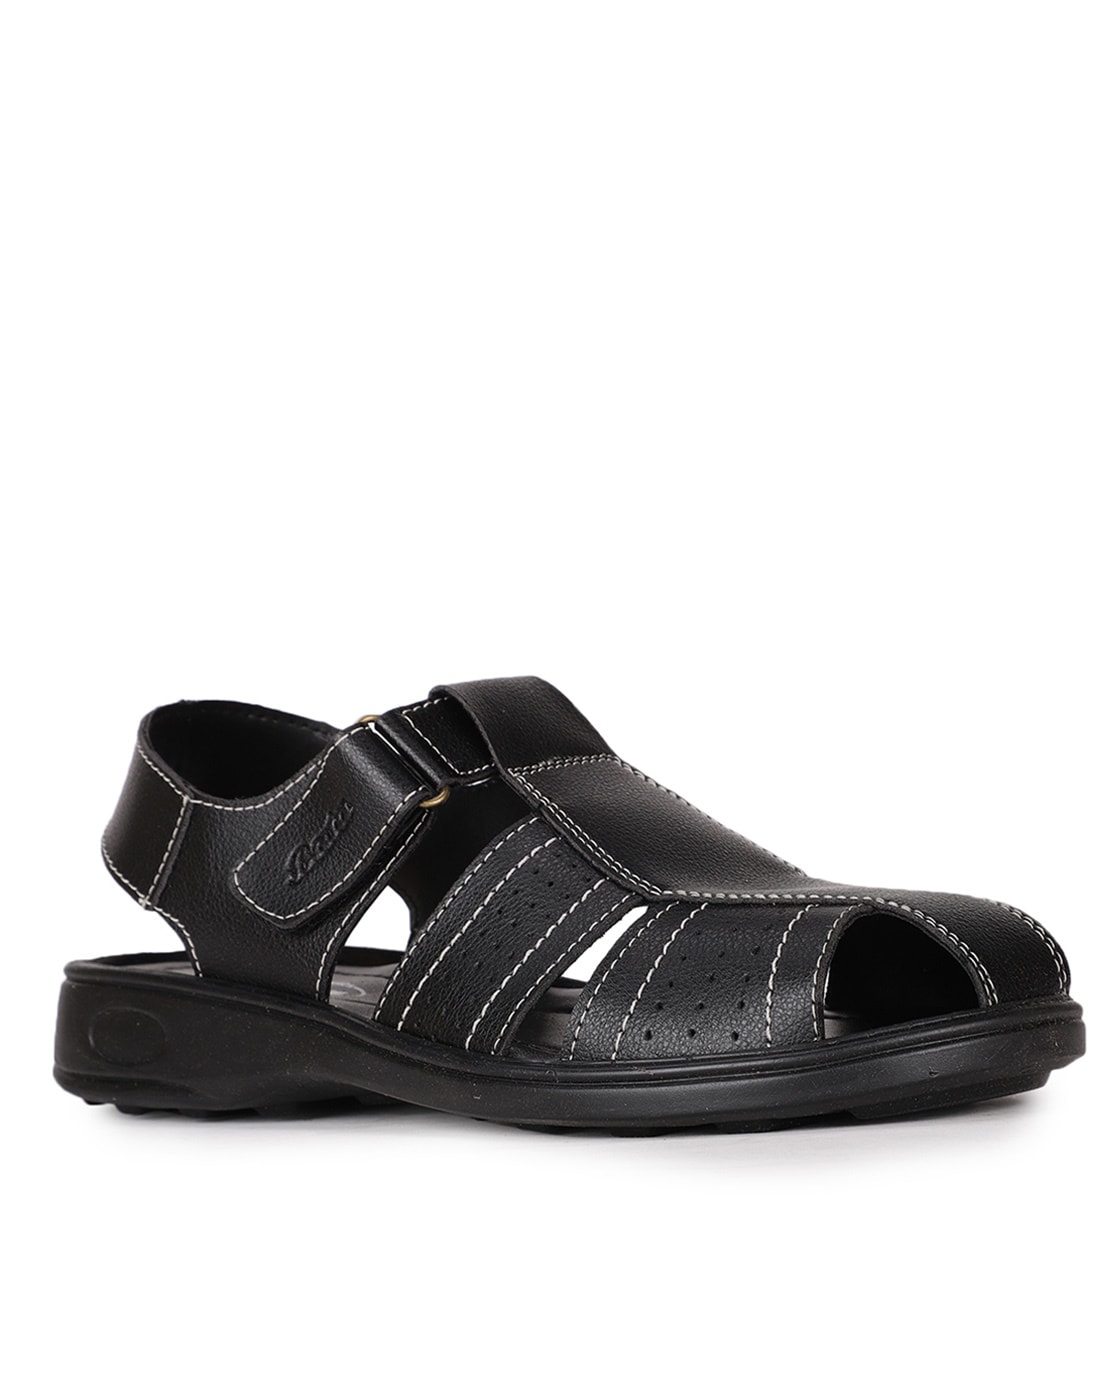 Update more than 119 bata leather sandals latest